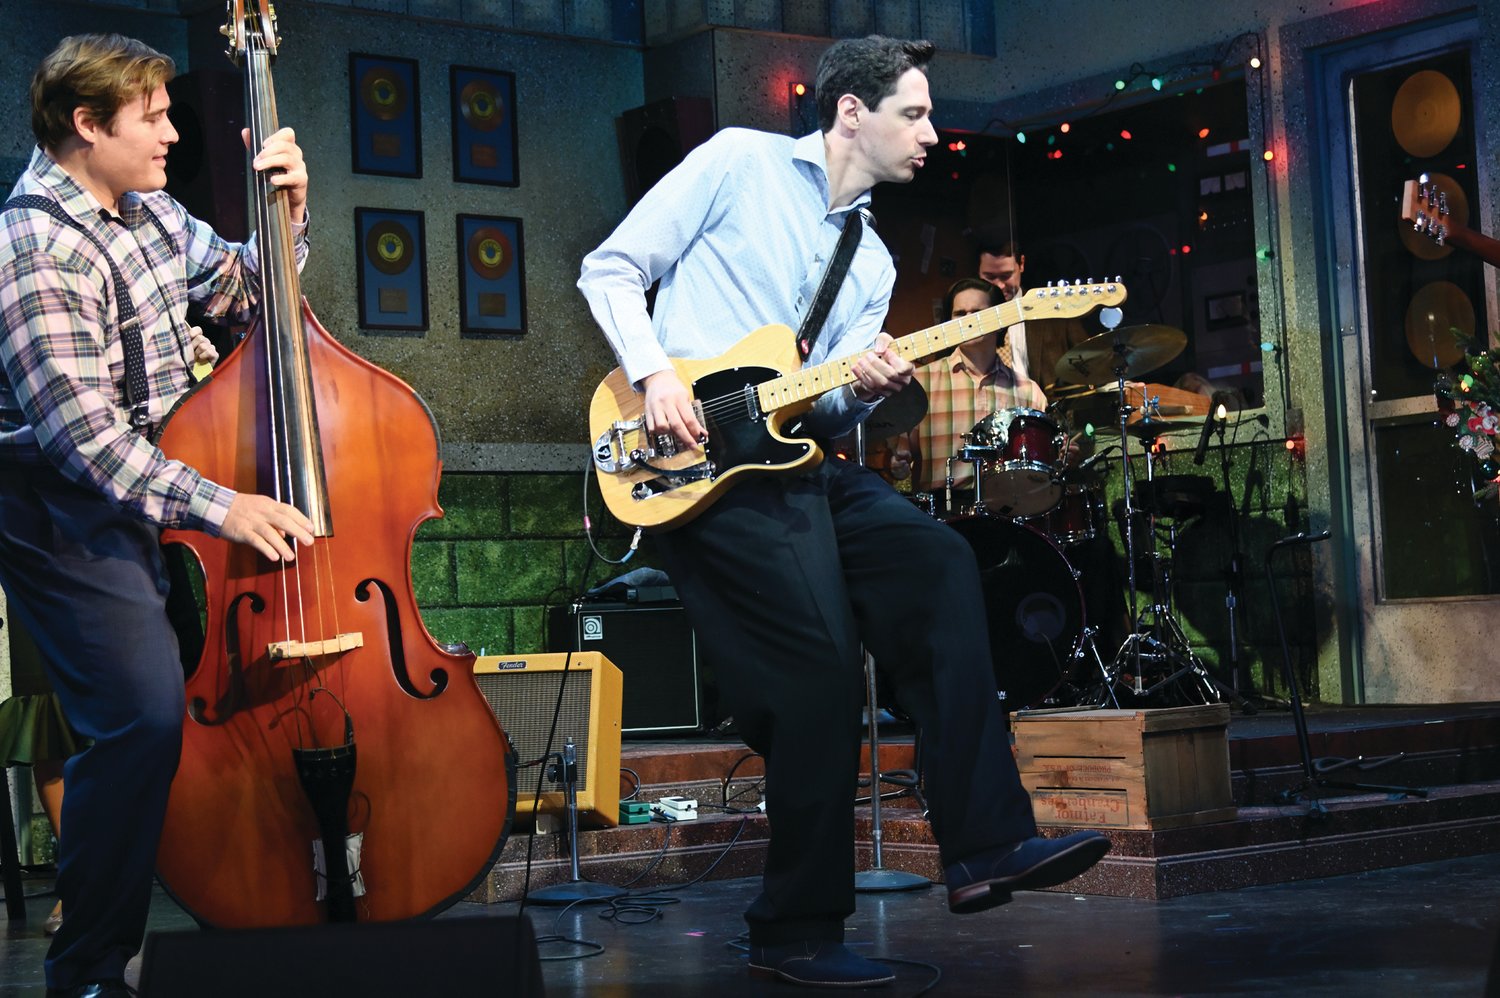 Colin Summers as Carl Perkins (right) with Kroy Presley as Brother Jay “Million Dollar Quartet.”